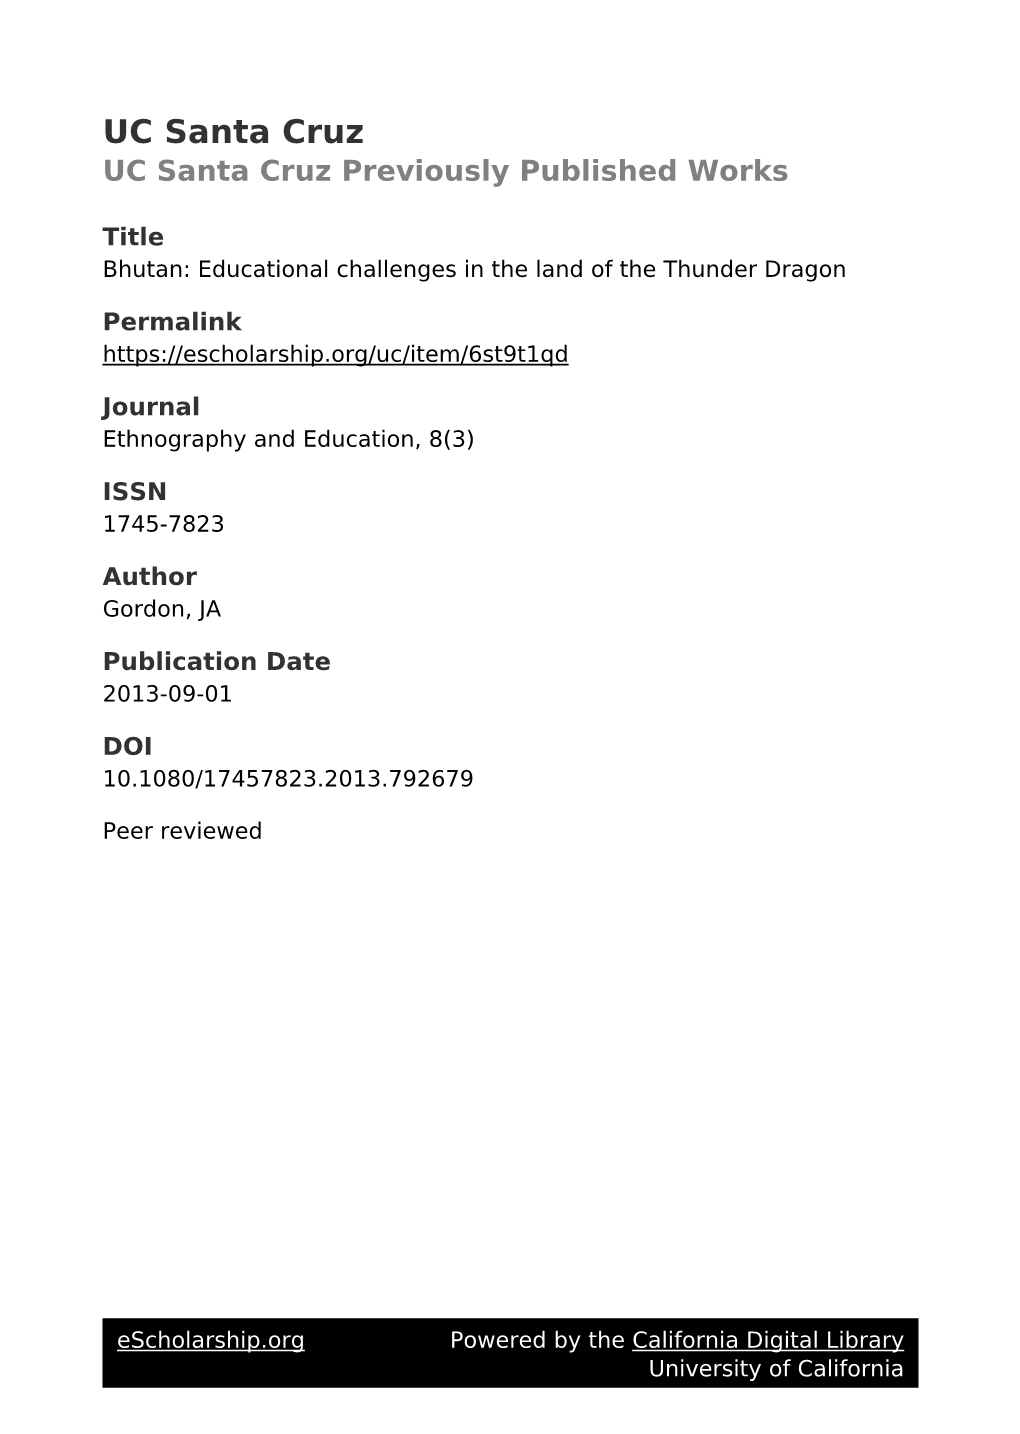 Bhutan: Educational Challenges in the Land of the Thunder Dragon